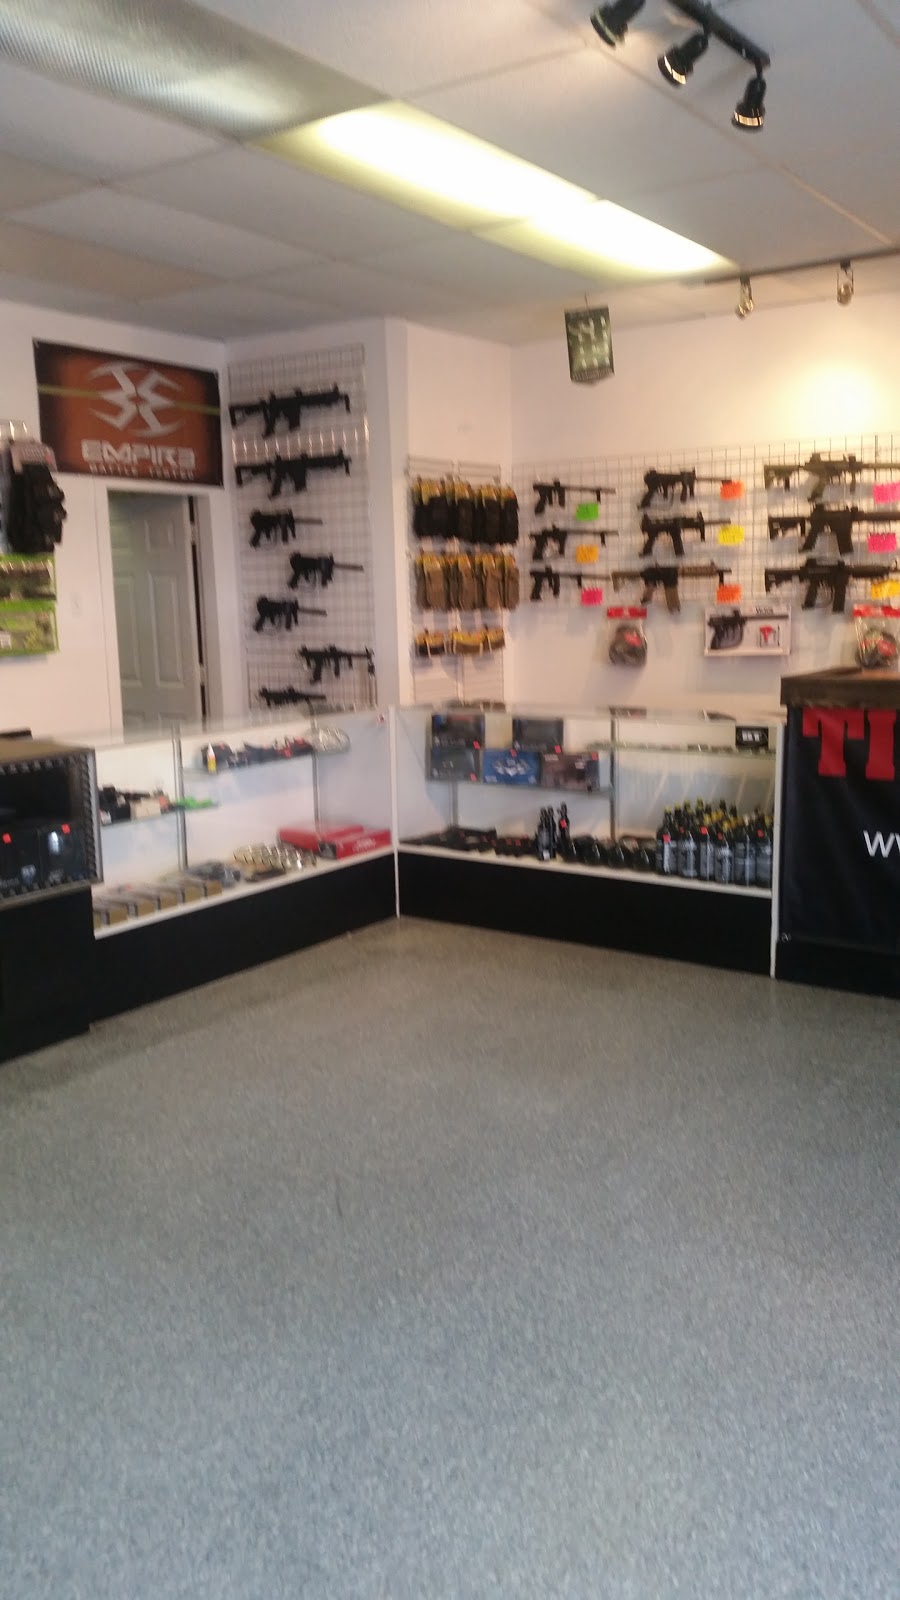 kens magasin paintball | store | 8136 jean-brillon, LaSalle, QC H8N 2J5, Canada | 5143639391 OR +1 514-363-9391